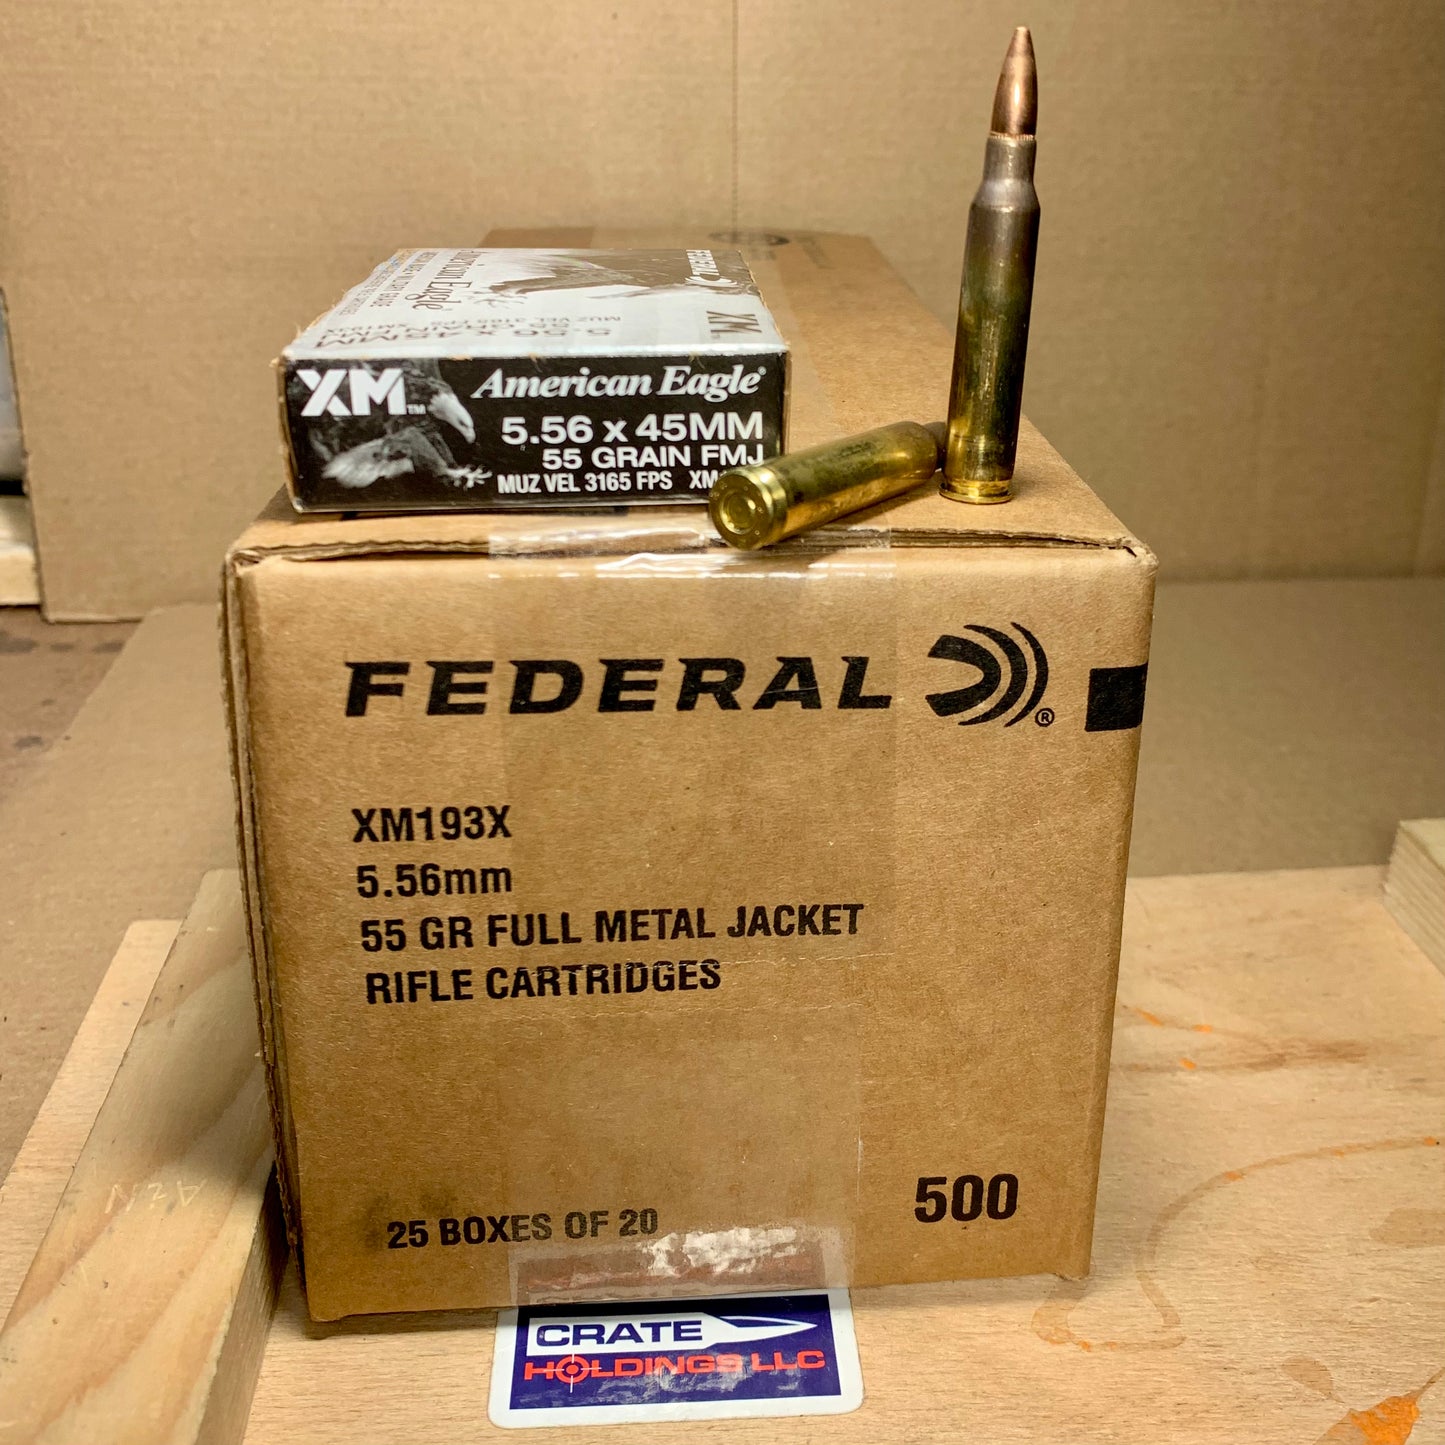 500 Round Case of Federal M193 5.56 NATO Ammo 55gr FMJ - XM193X